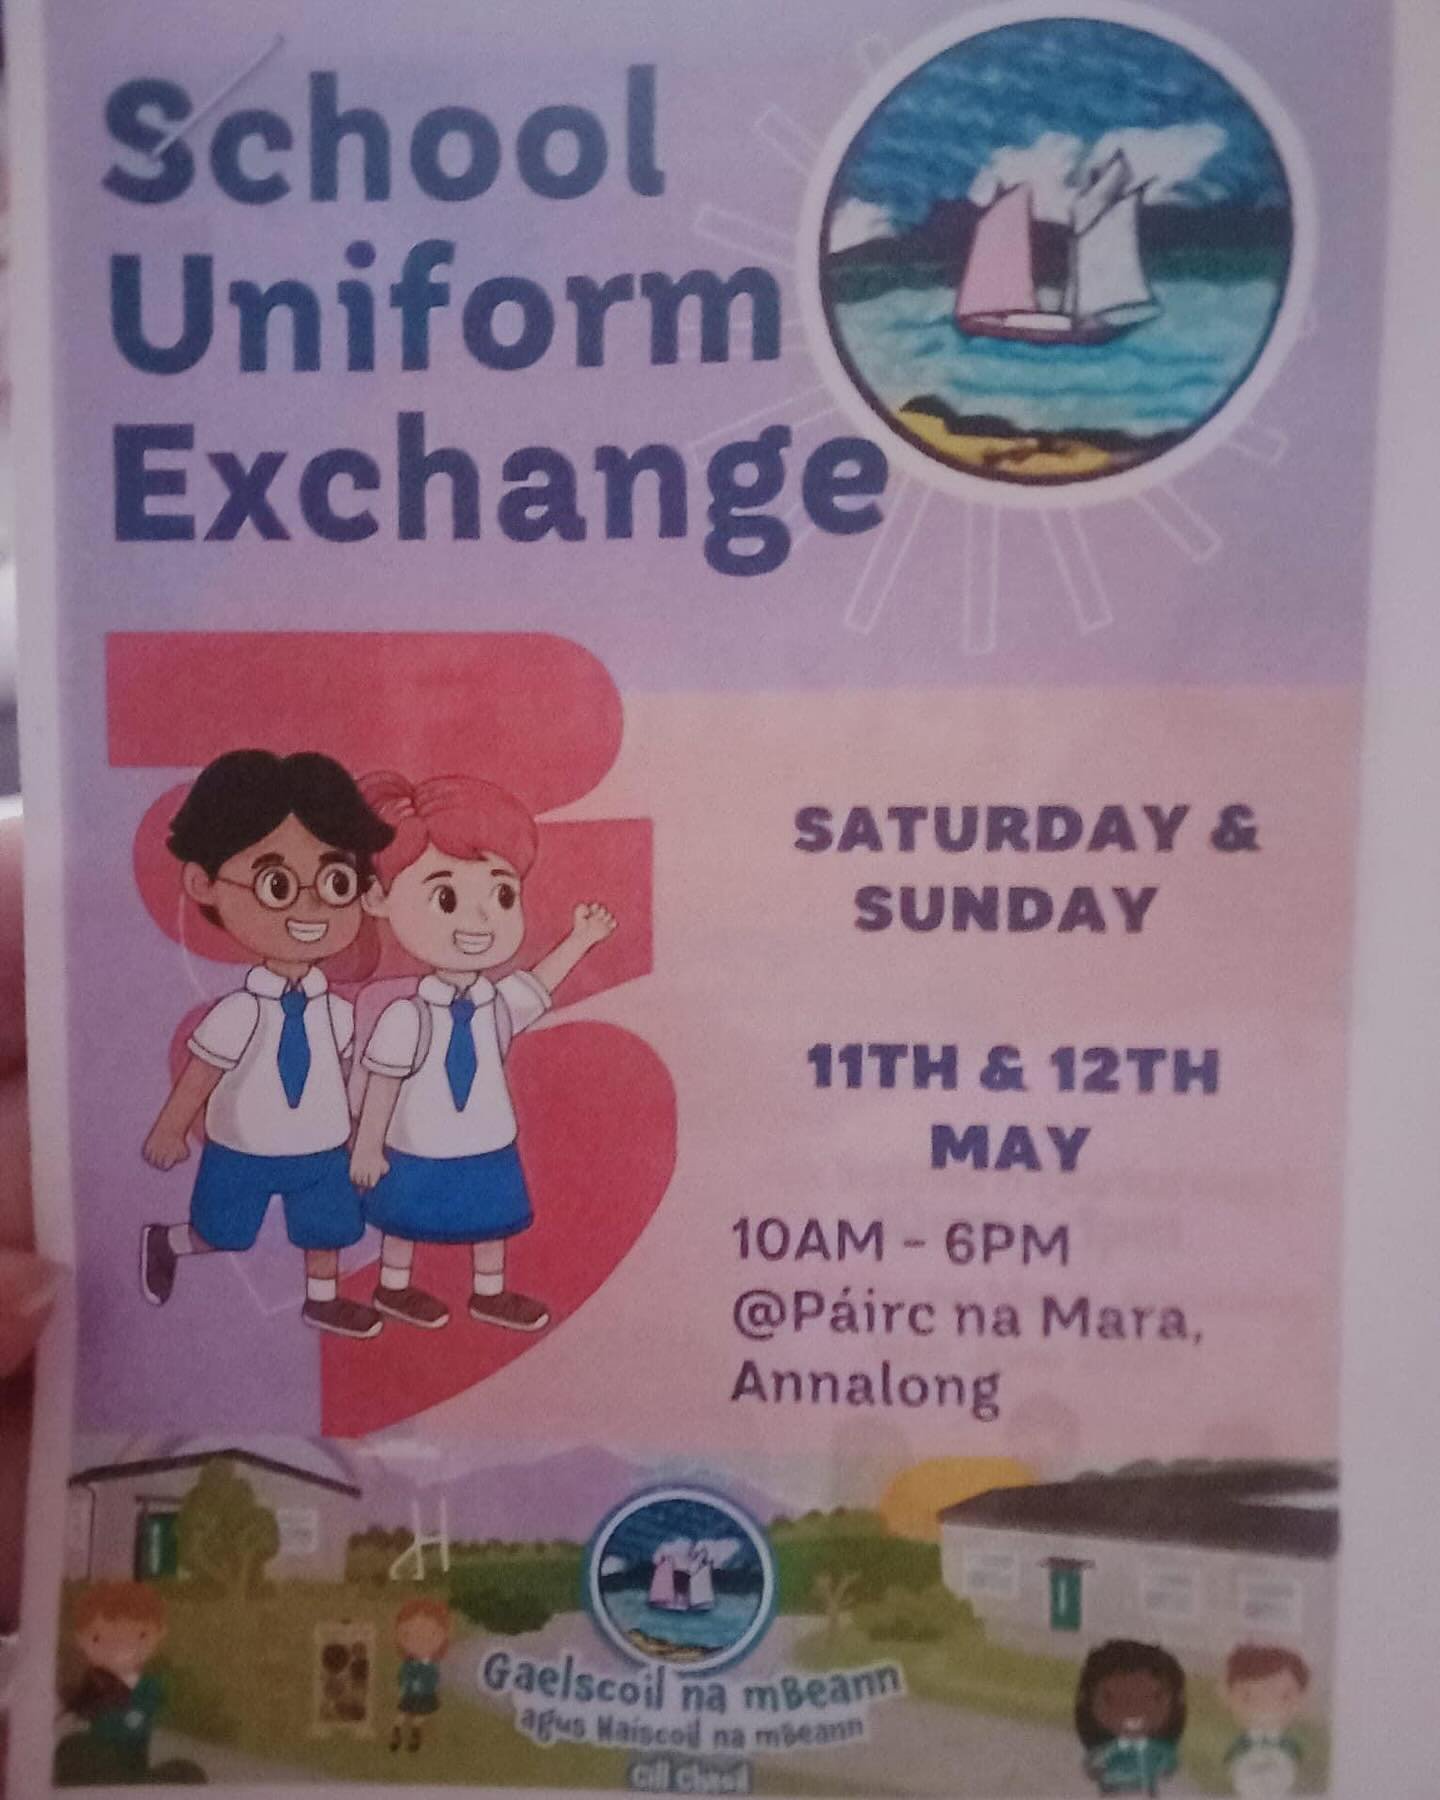 📣 School Uniform Exchange 📣

Calling all Current and soon to be Tuismitheoir&iacute; (Parents) of Gaelscoil &amp; Na&iacute;scoil na mBeann! 

We will have the school uniform exchange here tomorrow and Sunday 10-6pm. 🕣

Simply call into P&aacute;i